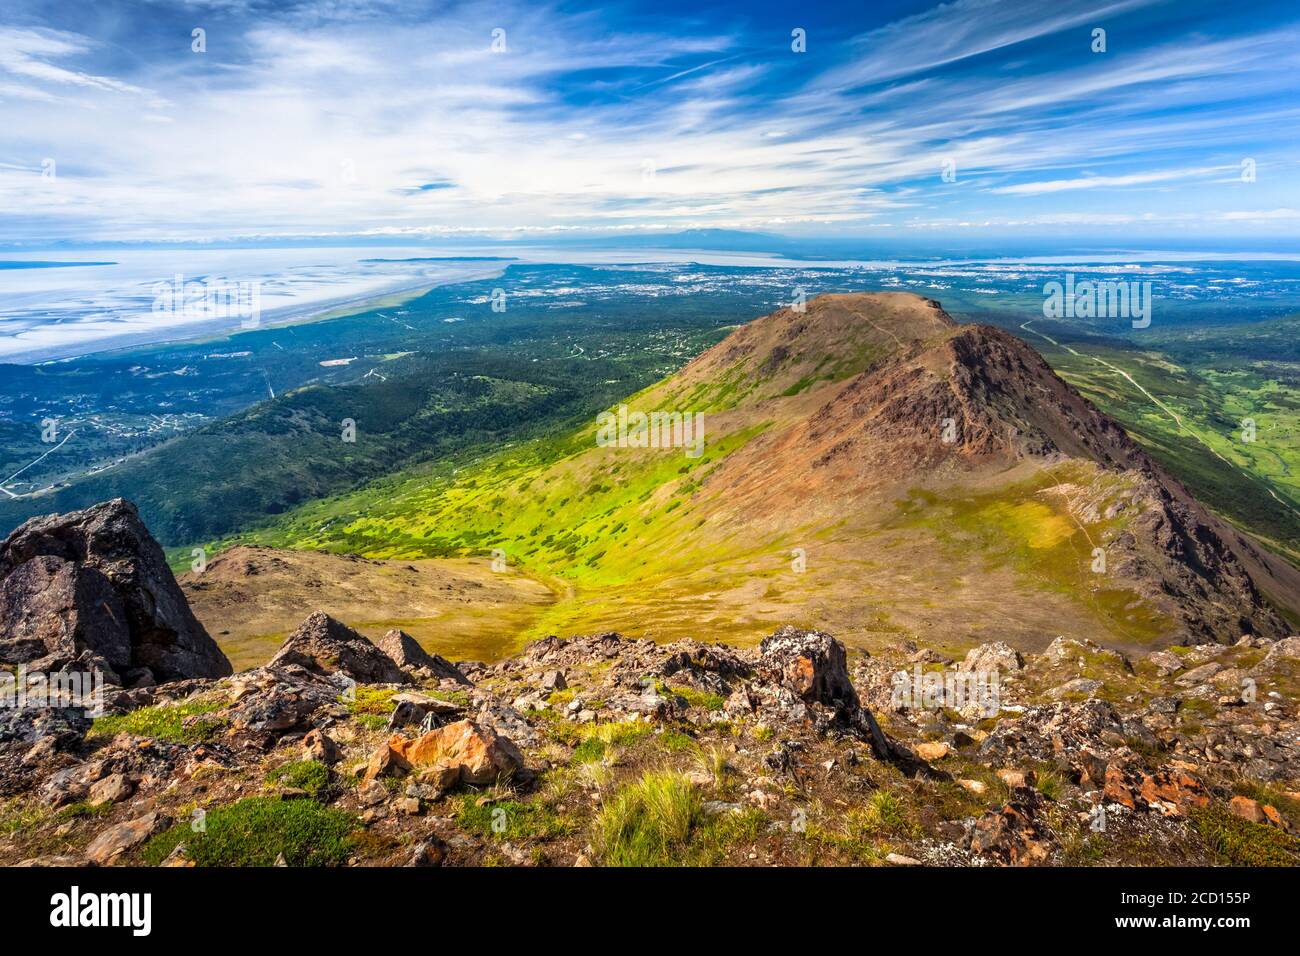 Flattop Mountains Peak 1, 2, and 3, viewed from Flaketop Mountain. Cook Inlet and Anchorage are in the background. Chugach State Park, South-centra... Stock Photo